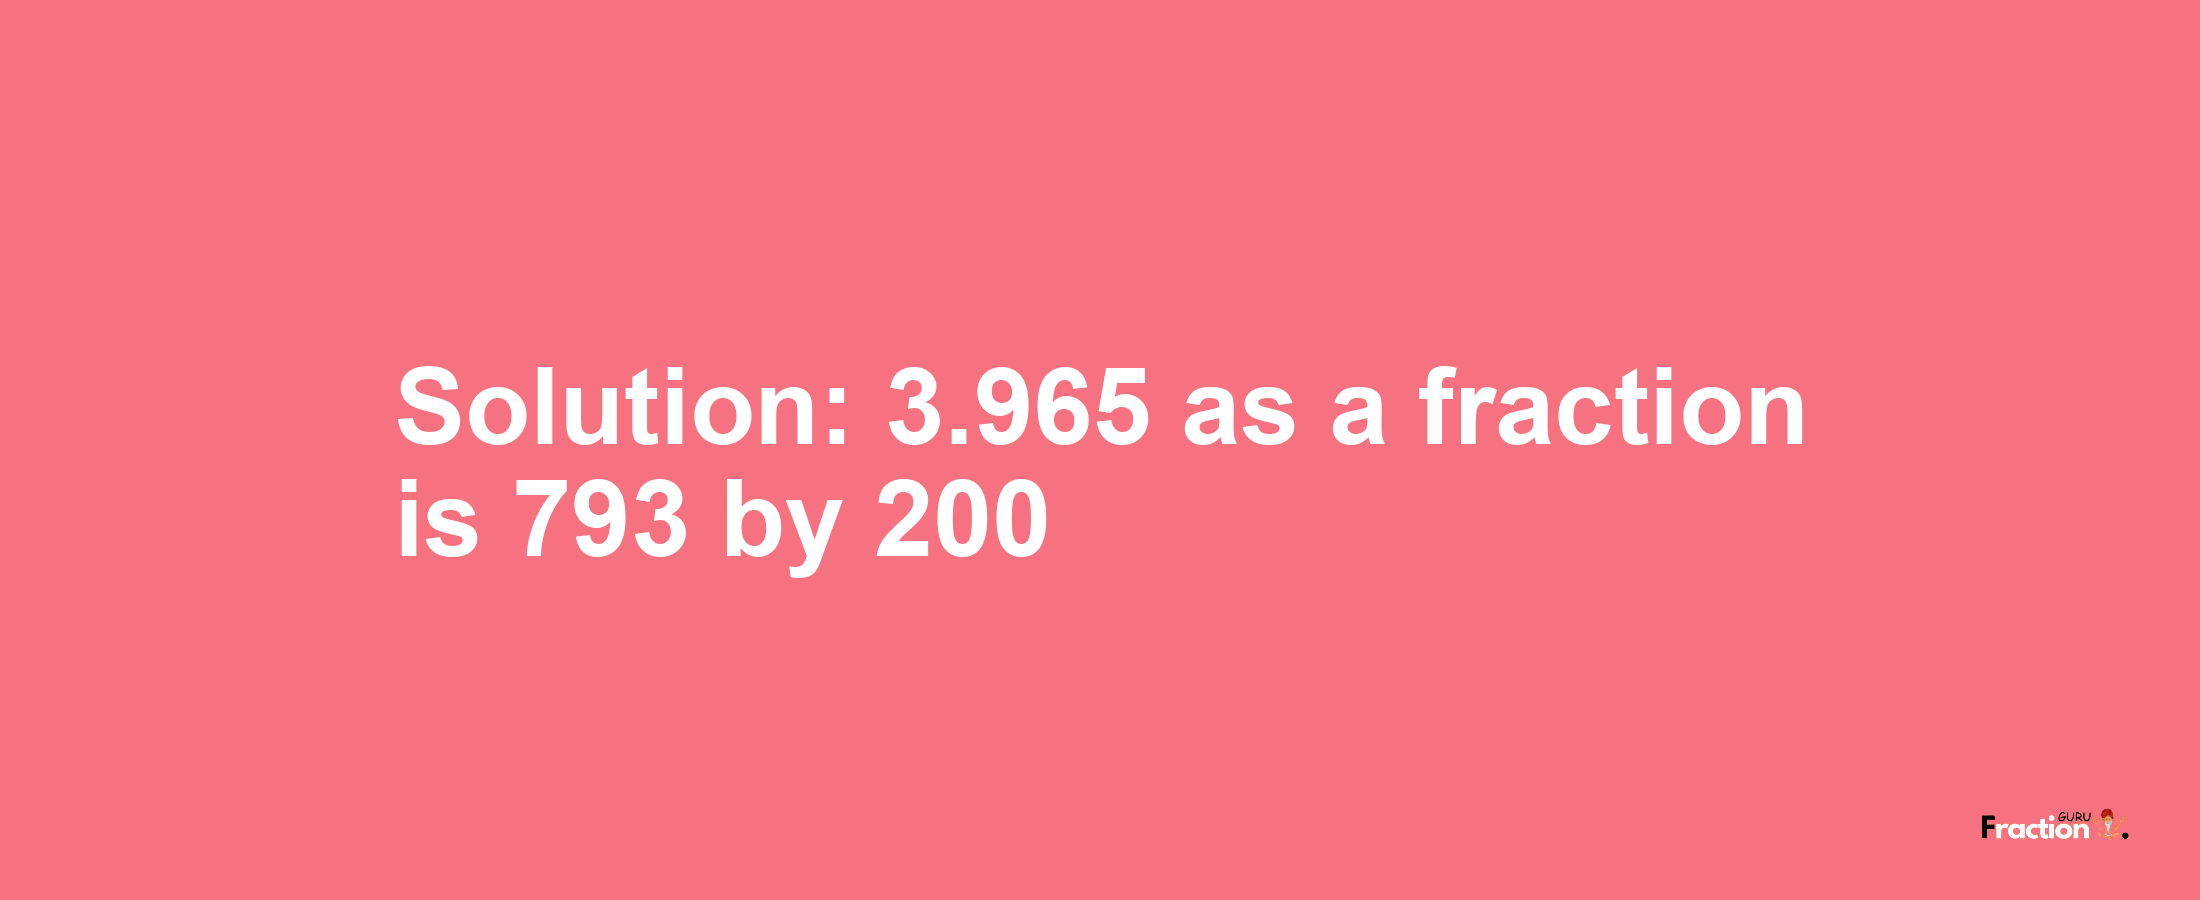 Solution:3.965 as a fraction is 793/200